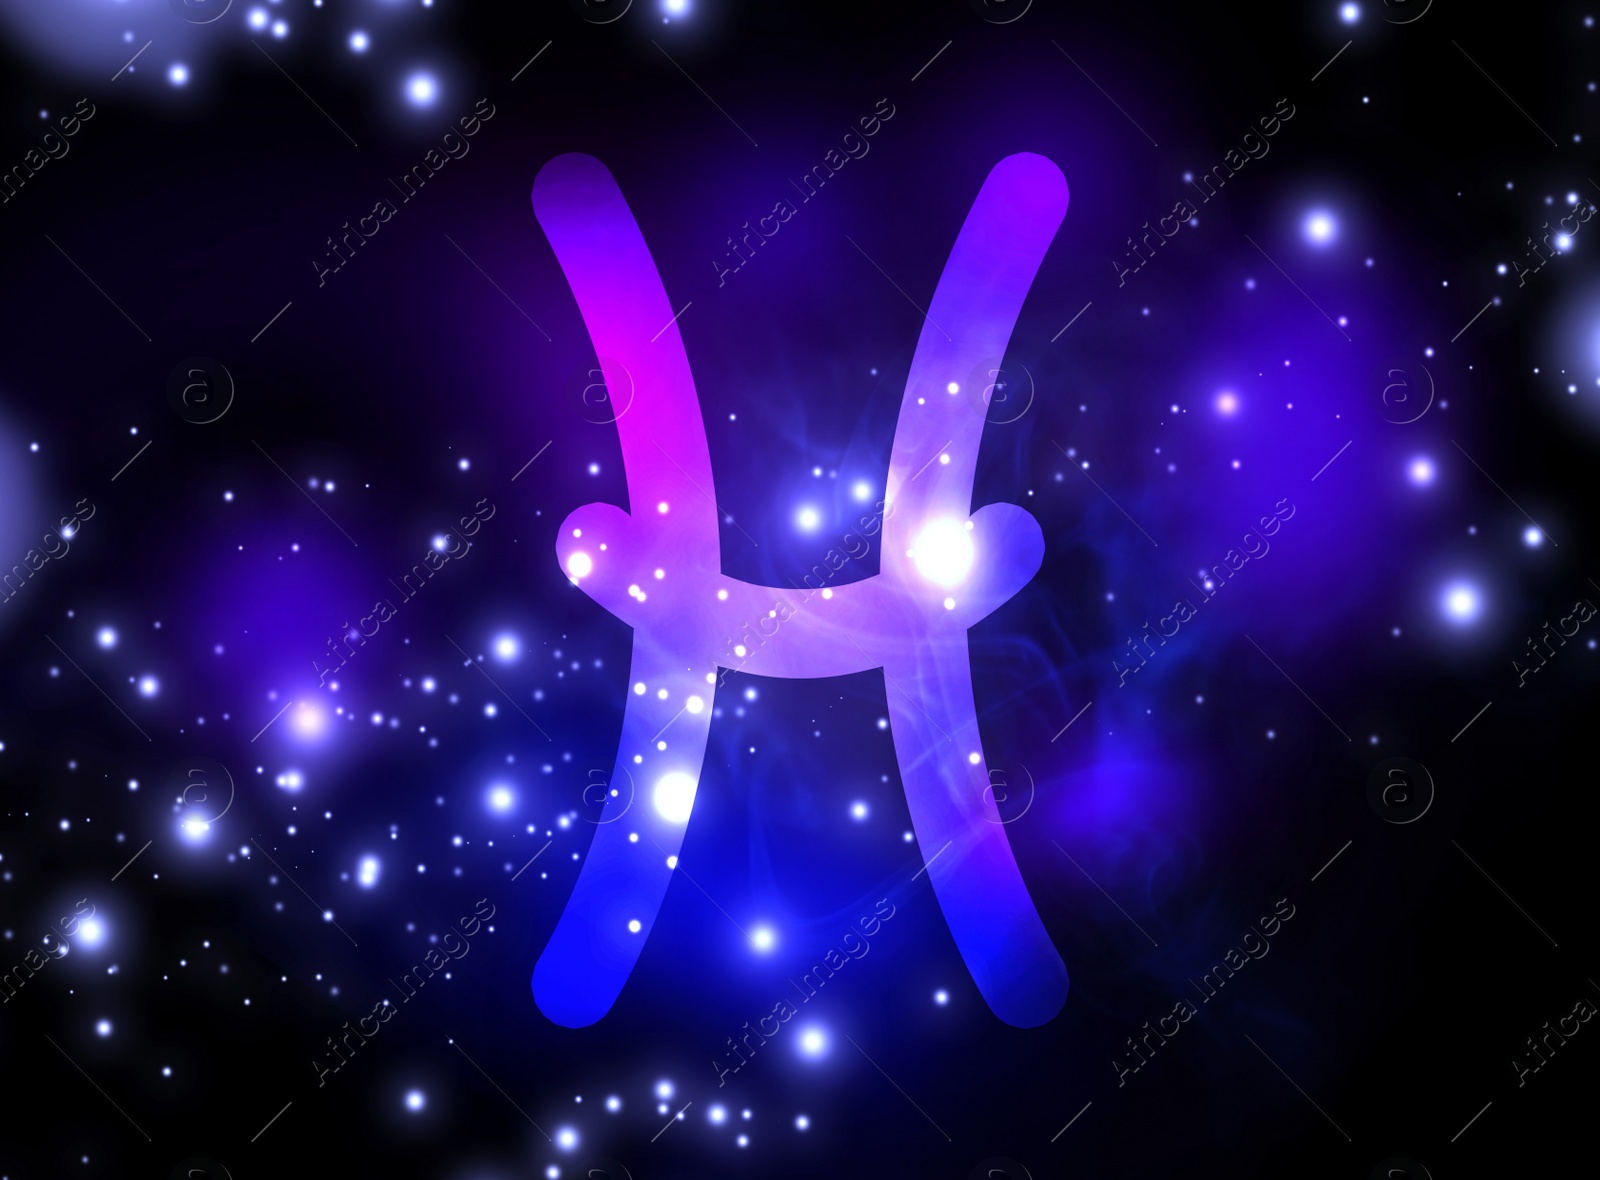 Illustration of Pisces astrological sign and night sky with stars. Illustration 